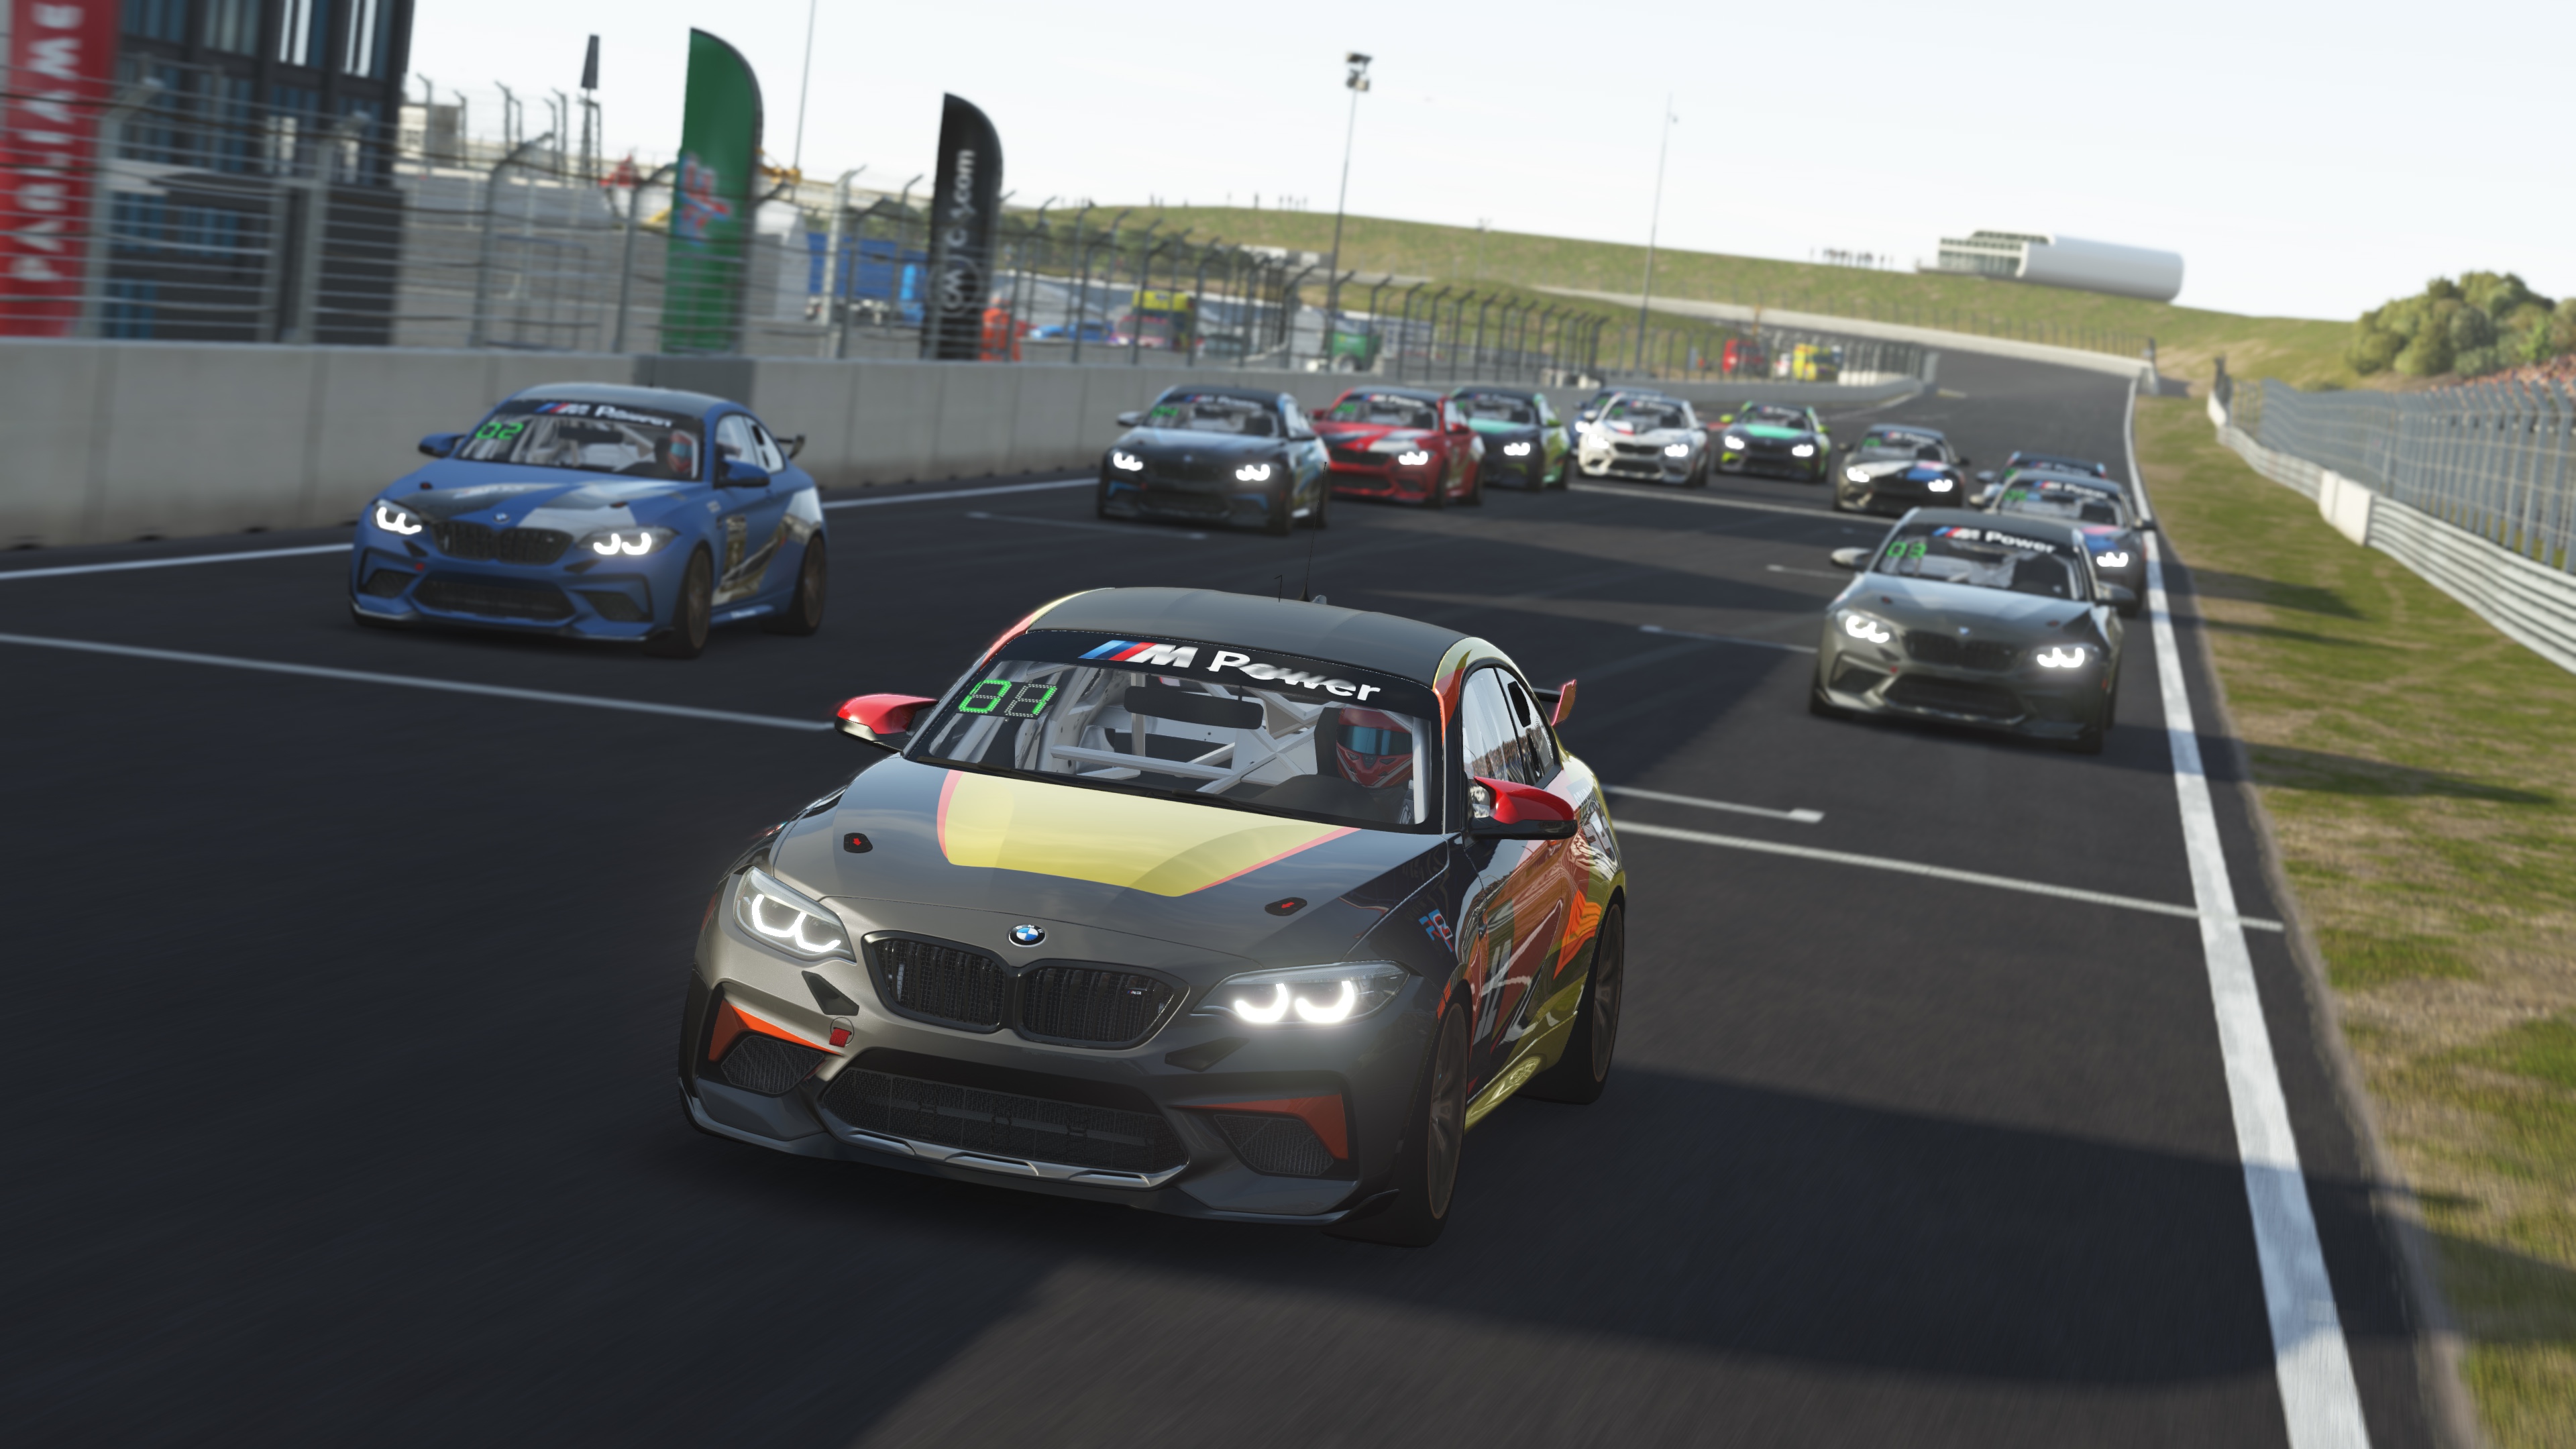 PWC in “Project Cars 2” video game